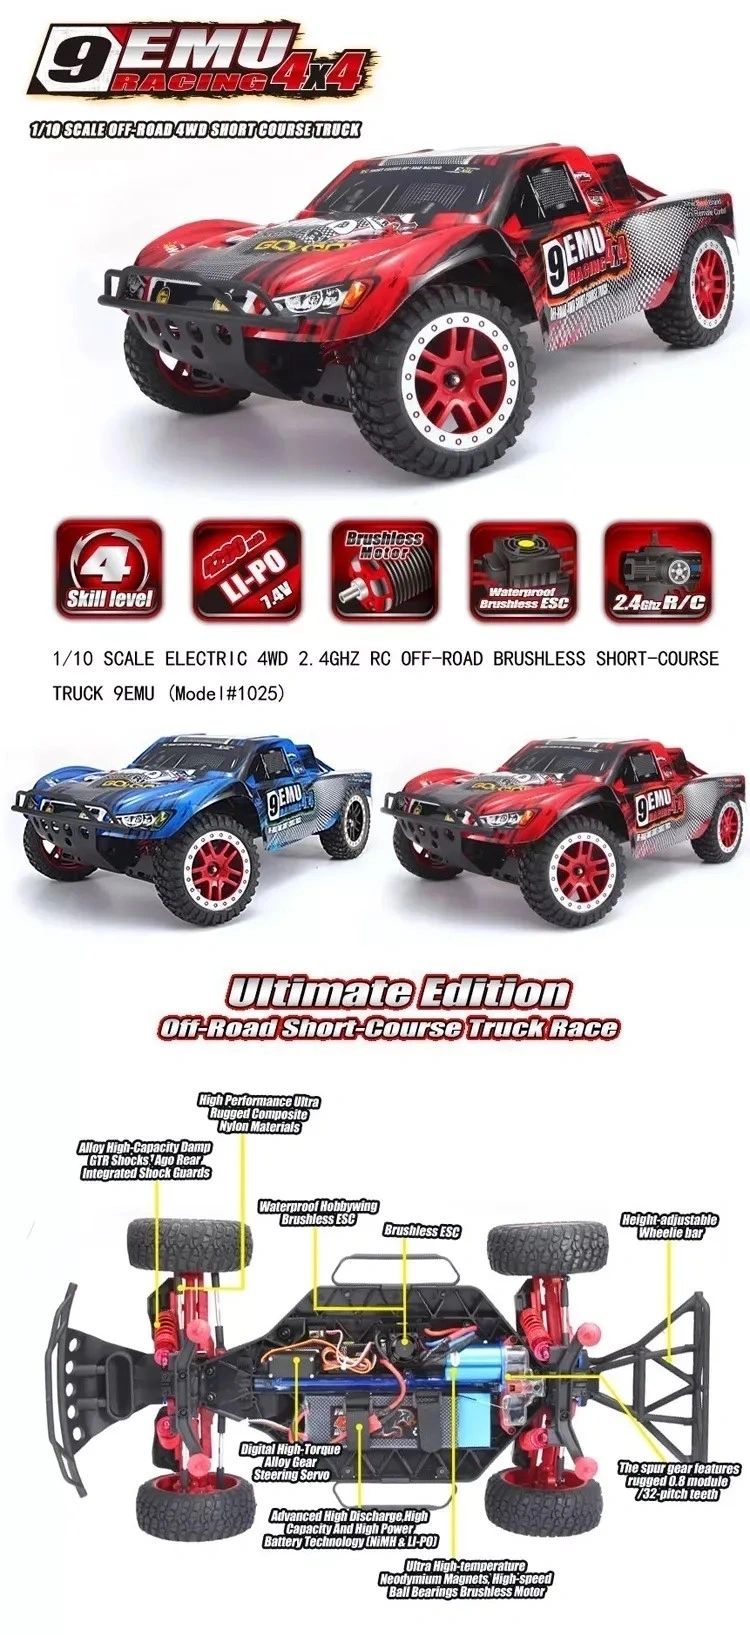 1:10 REMO HOBBY brushless Off-road short-distance truck